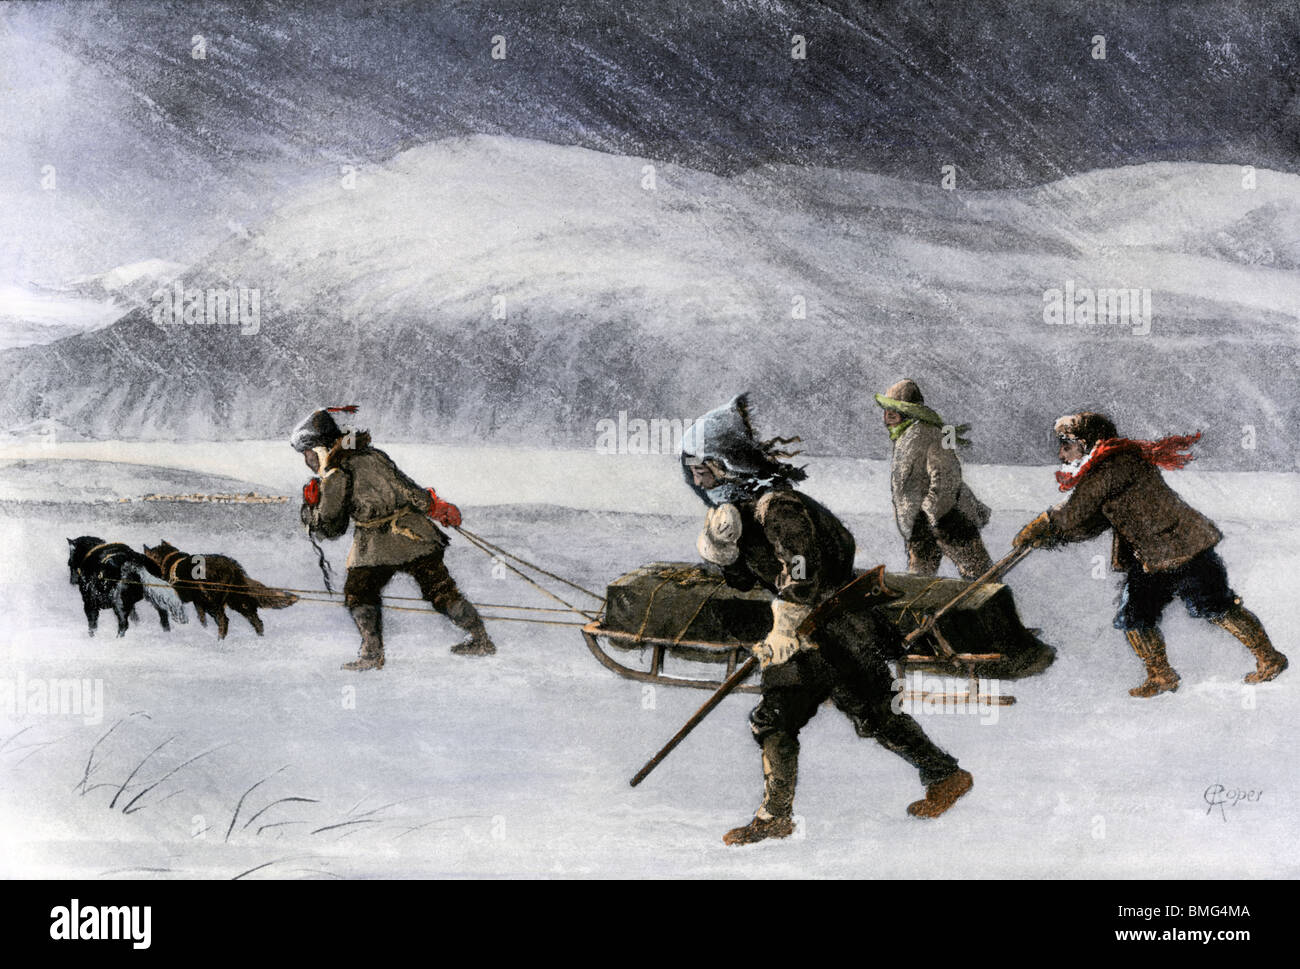 Prospectors' dogsled in a snowstorm to get to the Klondike goldfields, 1898. Hand-colored halftone of an illustration Stock Photo